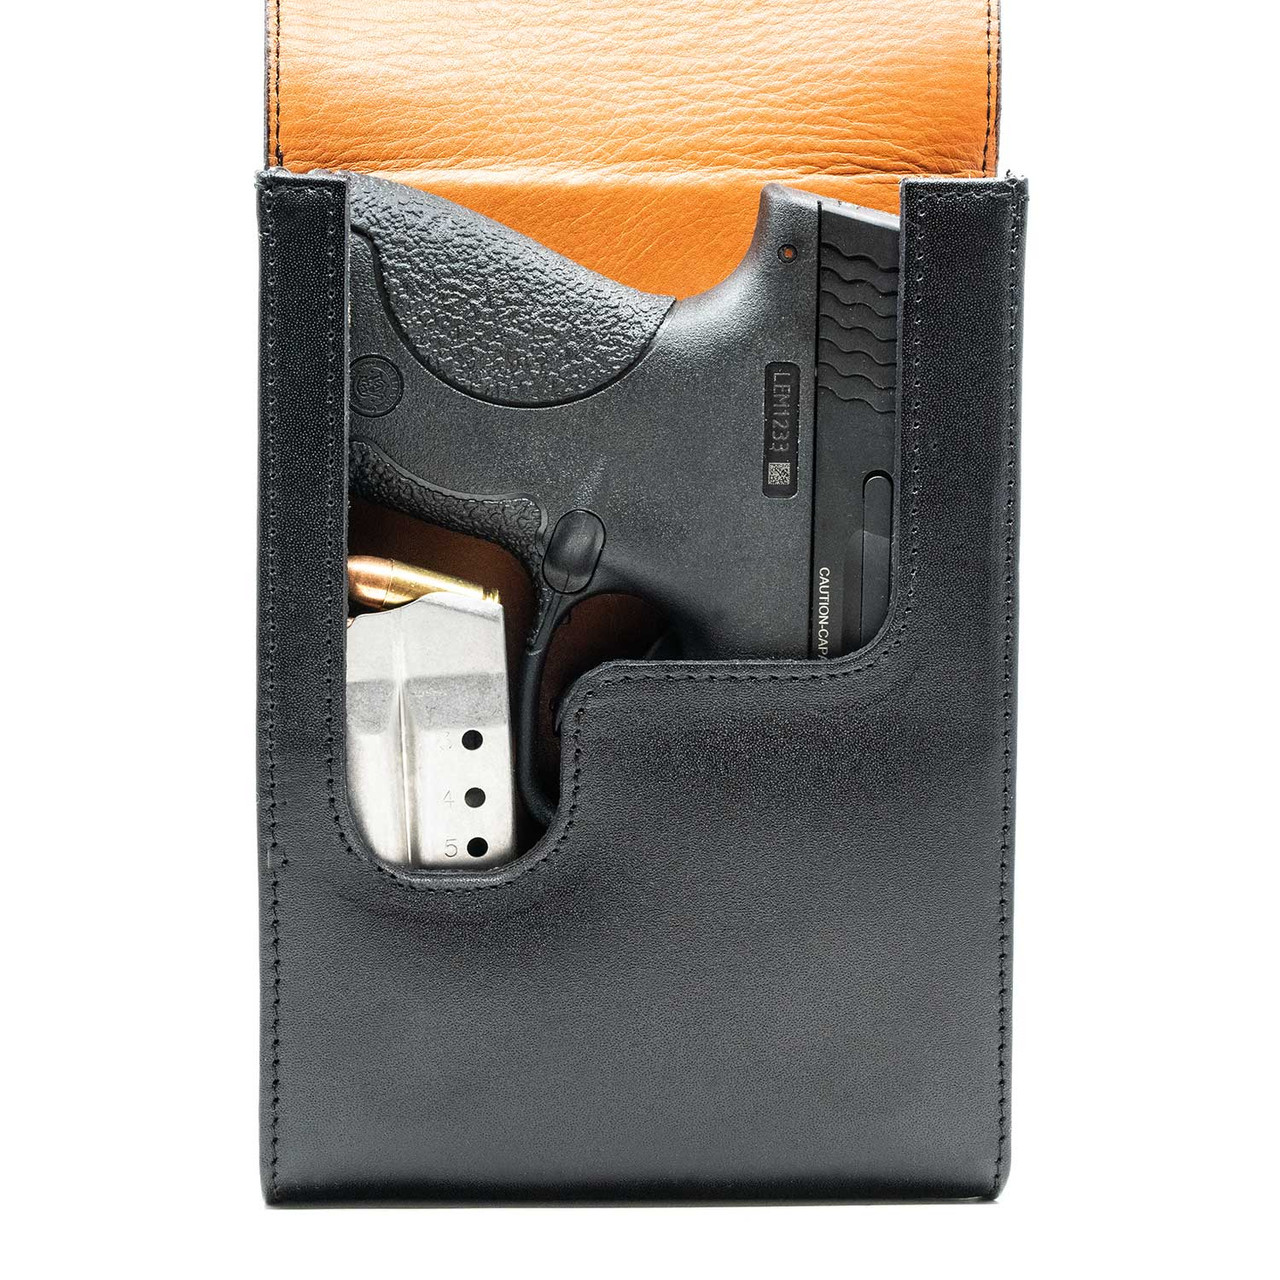 The Ruger Security 9 Xtra Mag Black Leather Holster